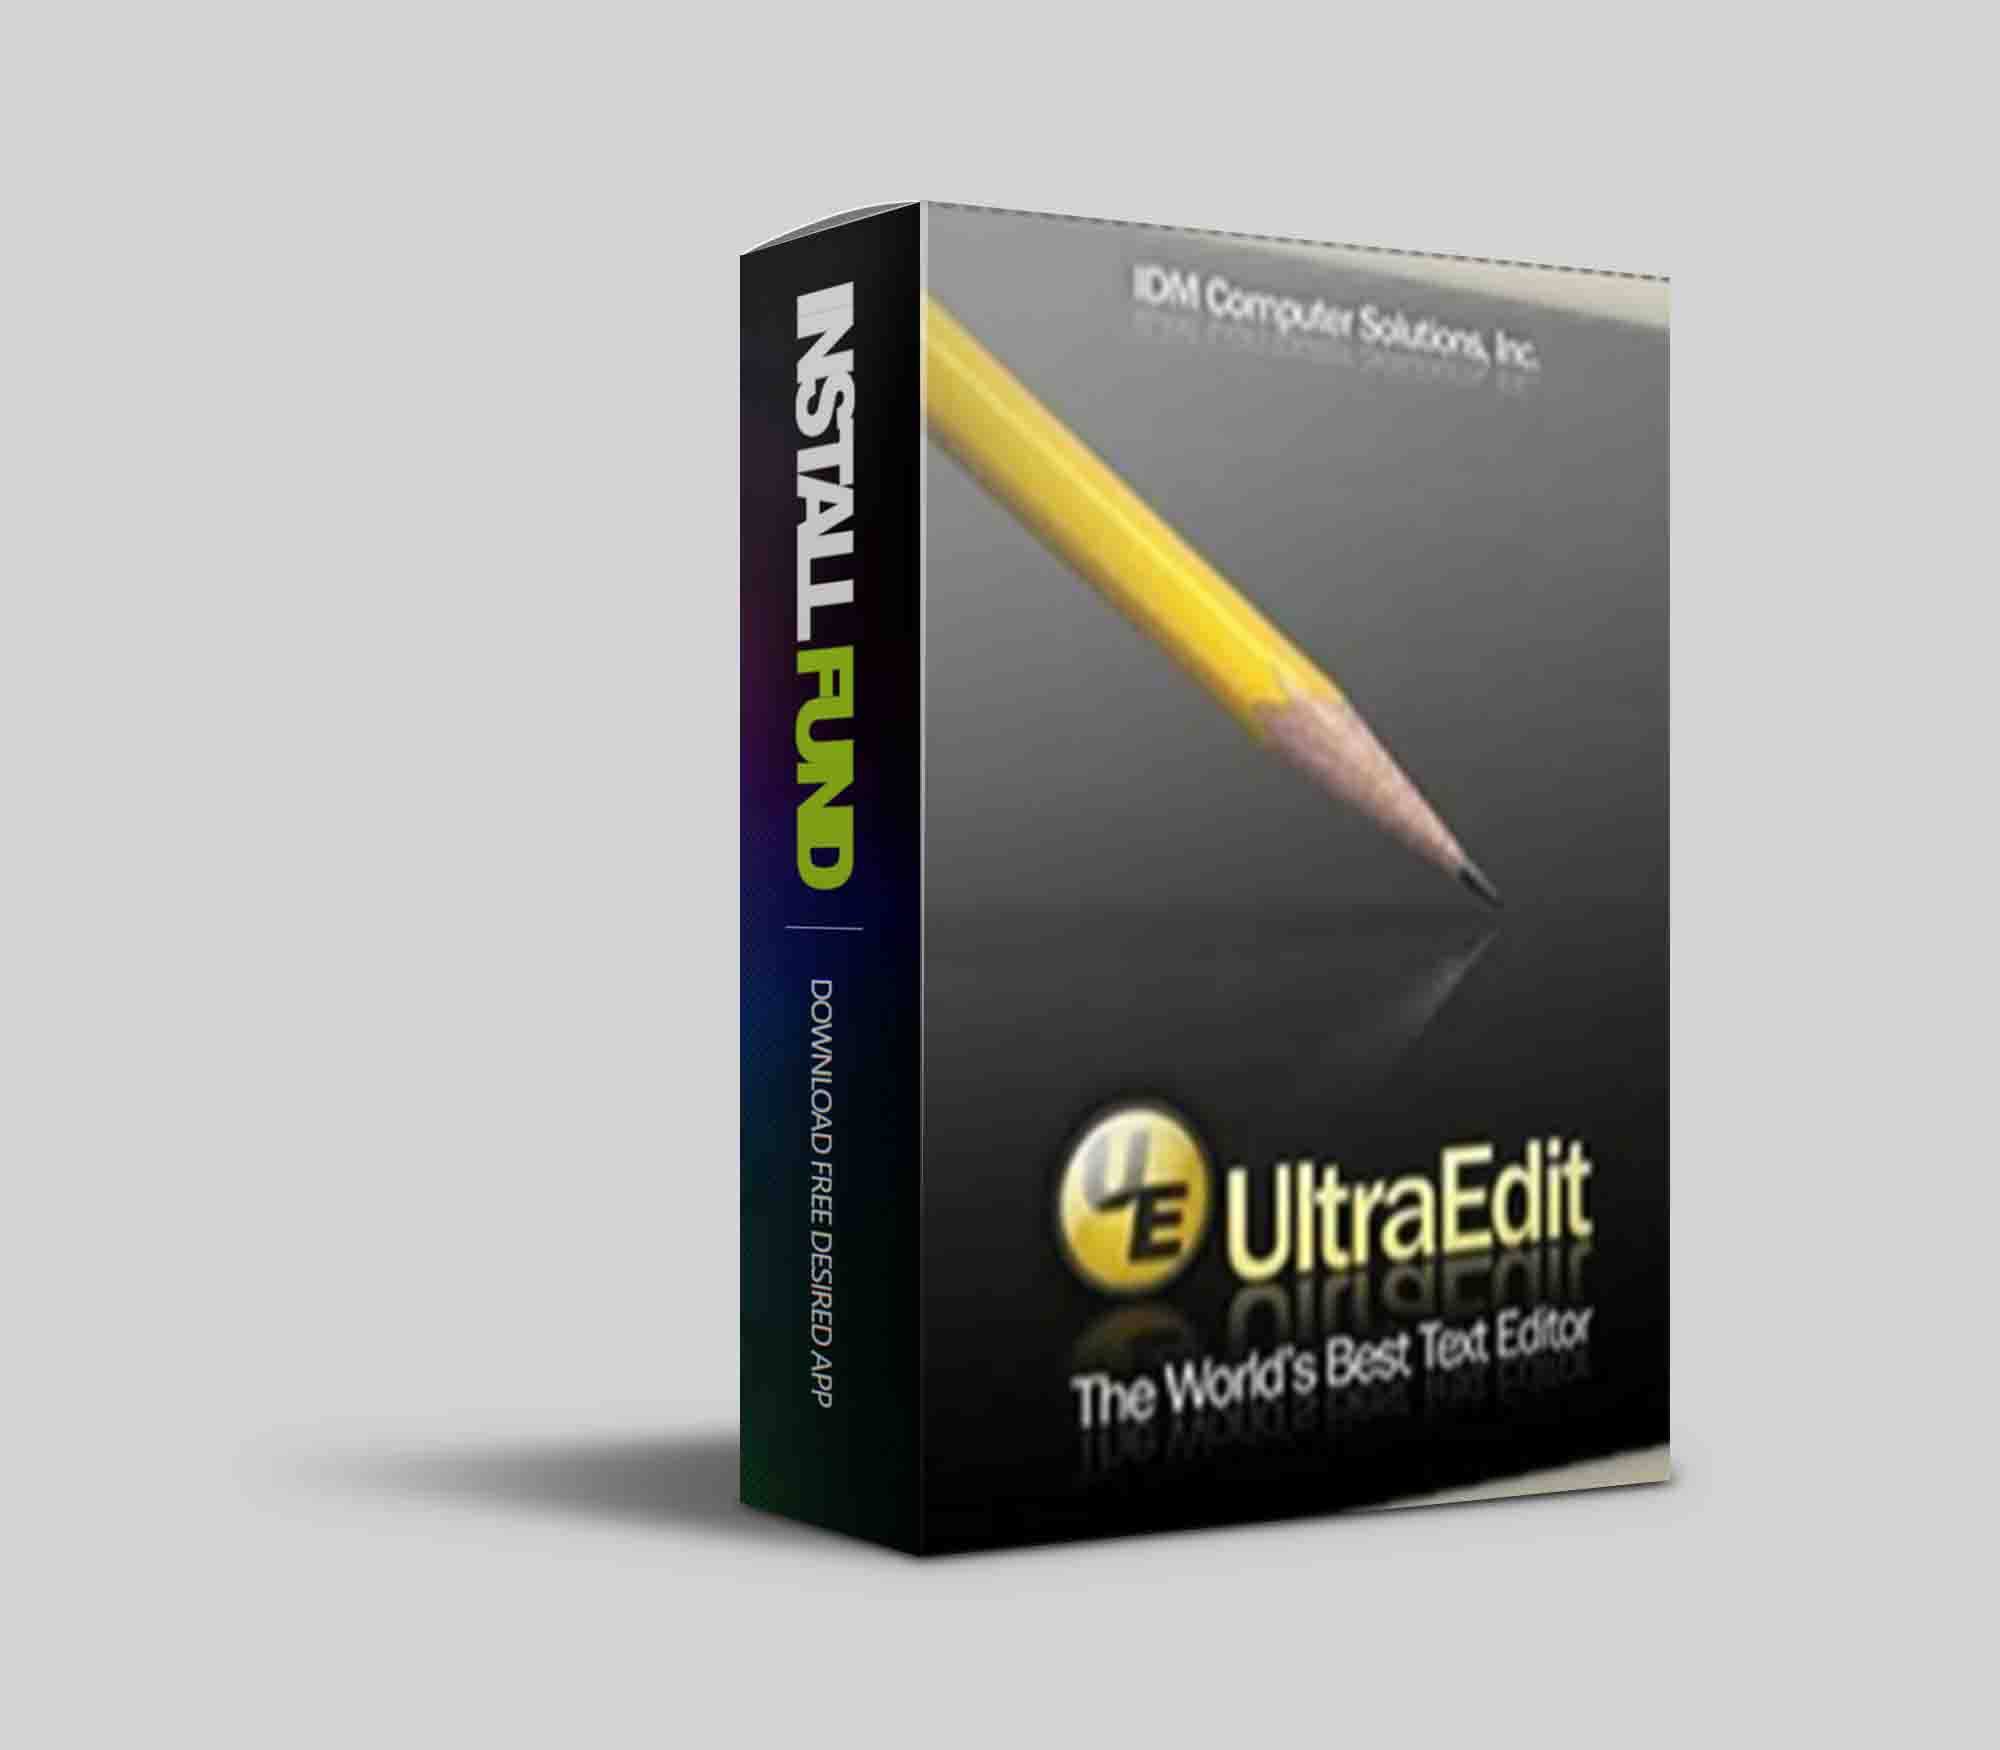 IDM UltraEdit 30.1.0.23 download the new for windows